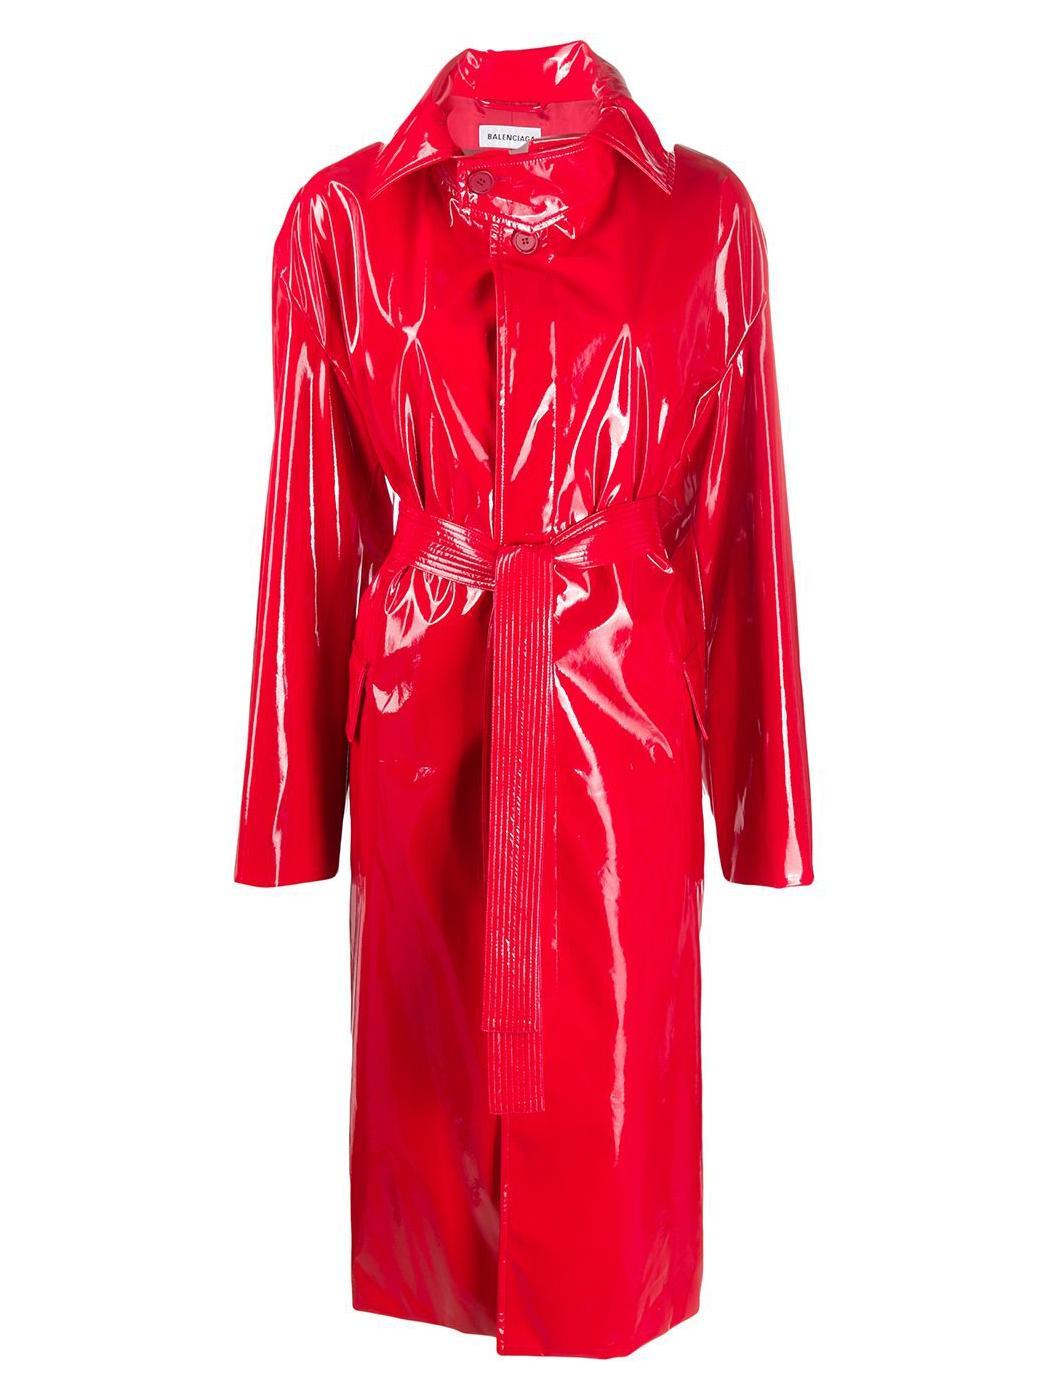 FEMME FATALE PATENT LEATHER TRENCH COAT — Aida KaaS | lupon.gov.ph